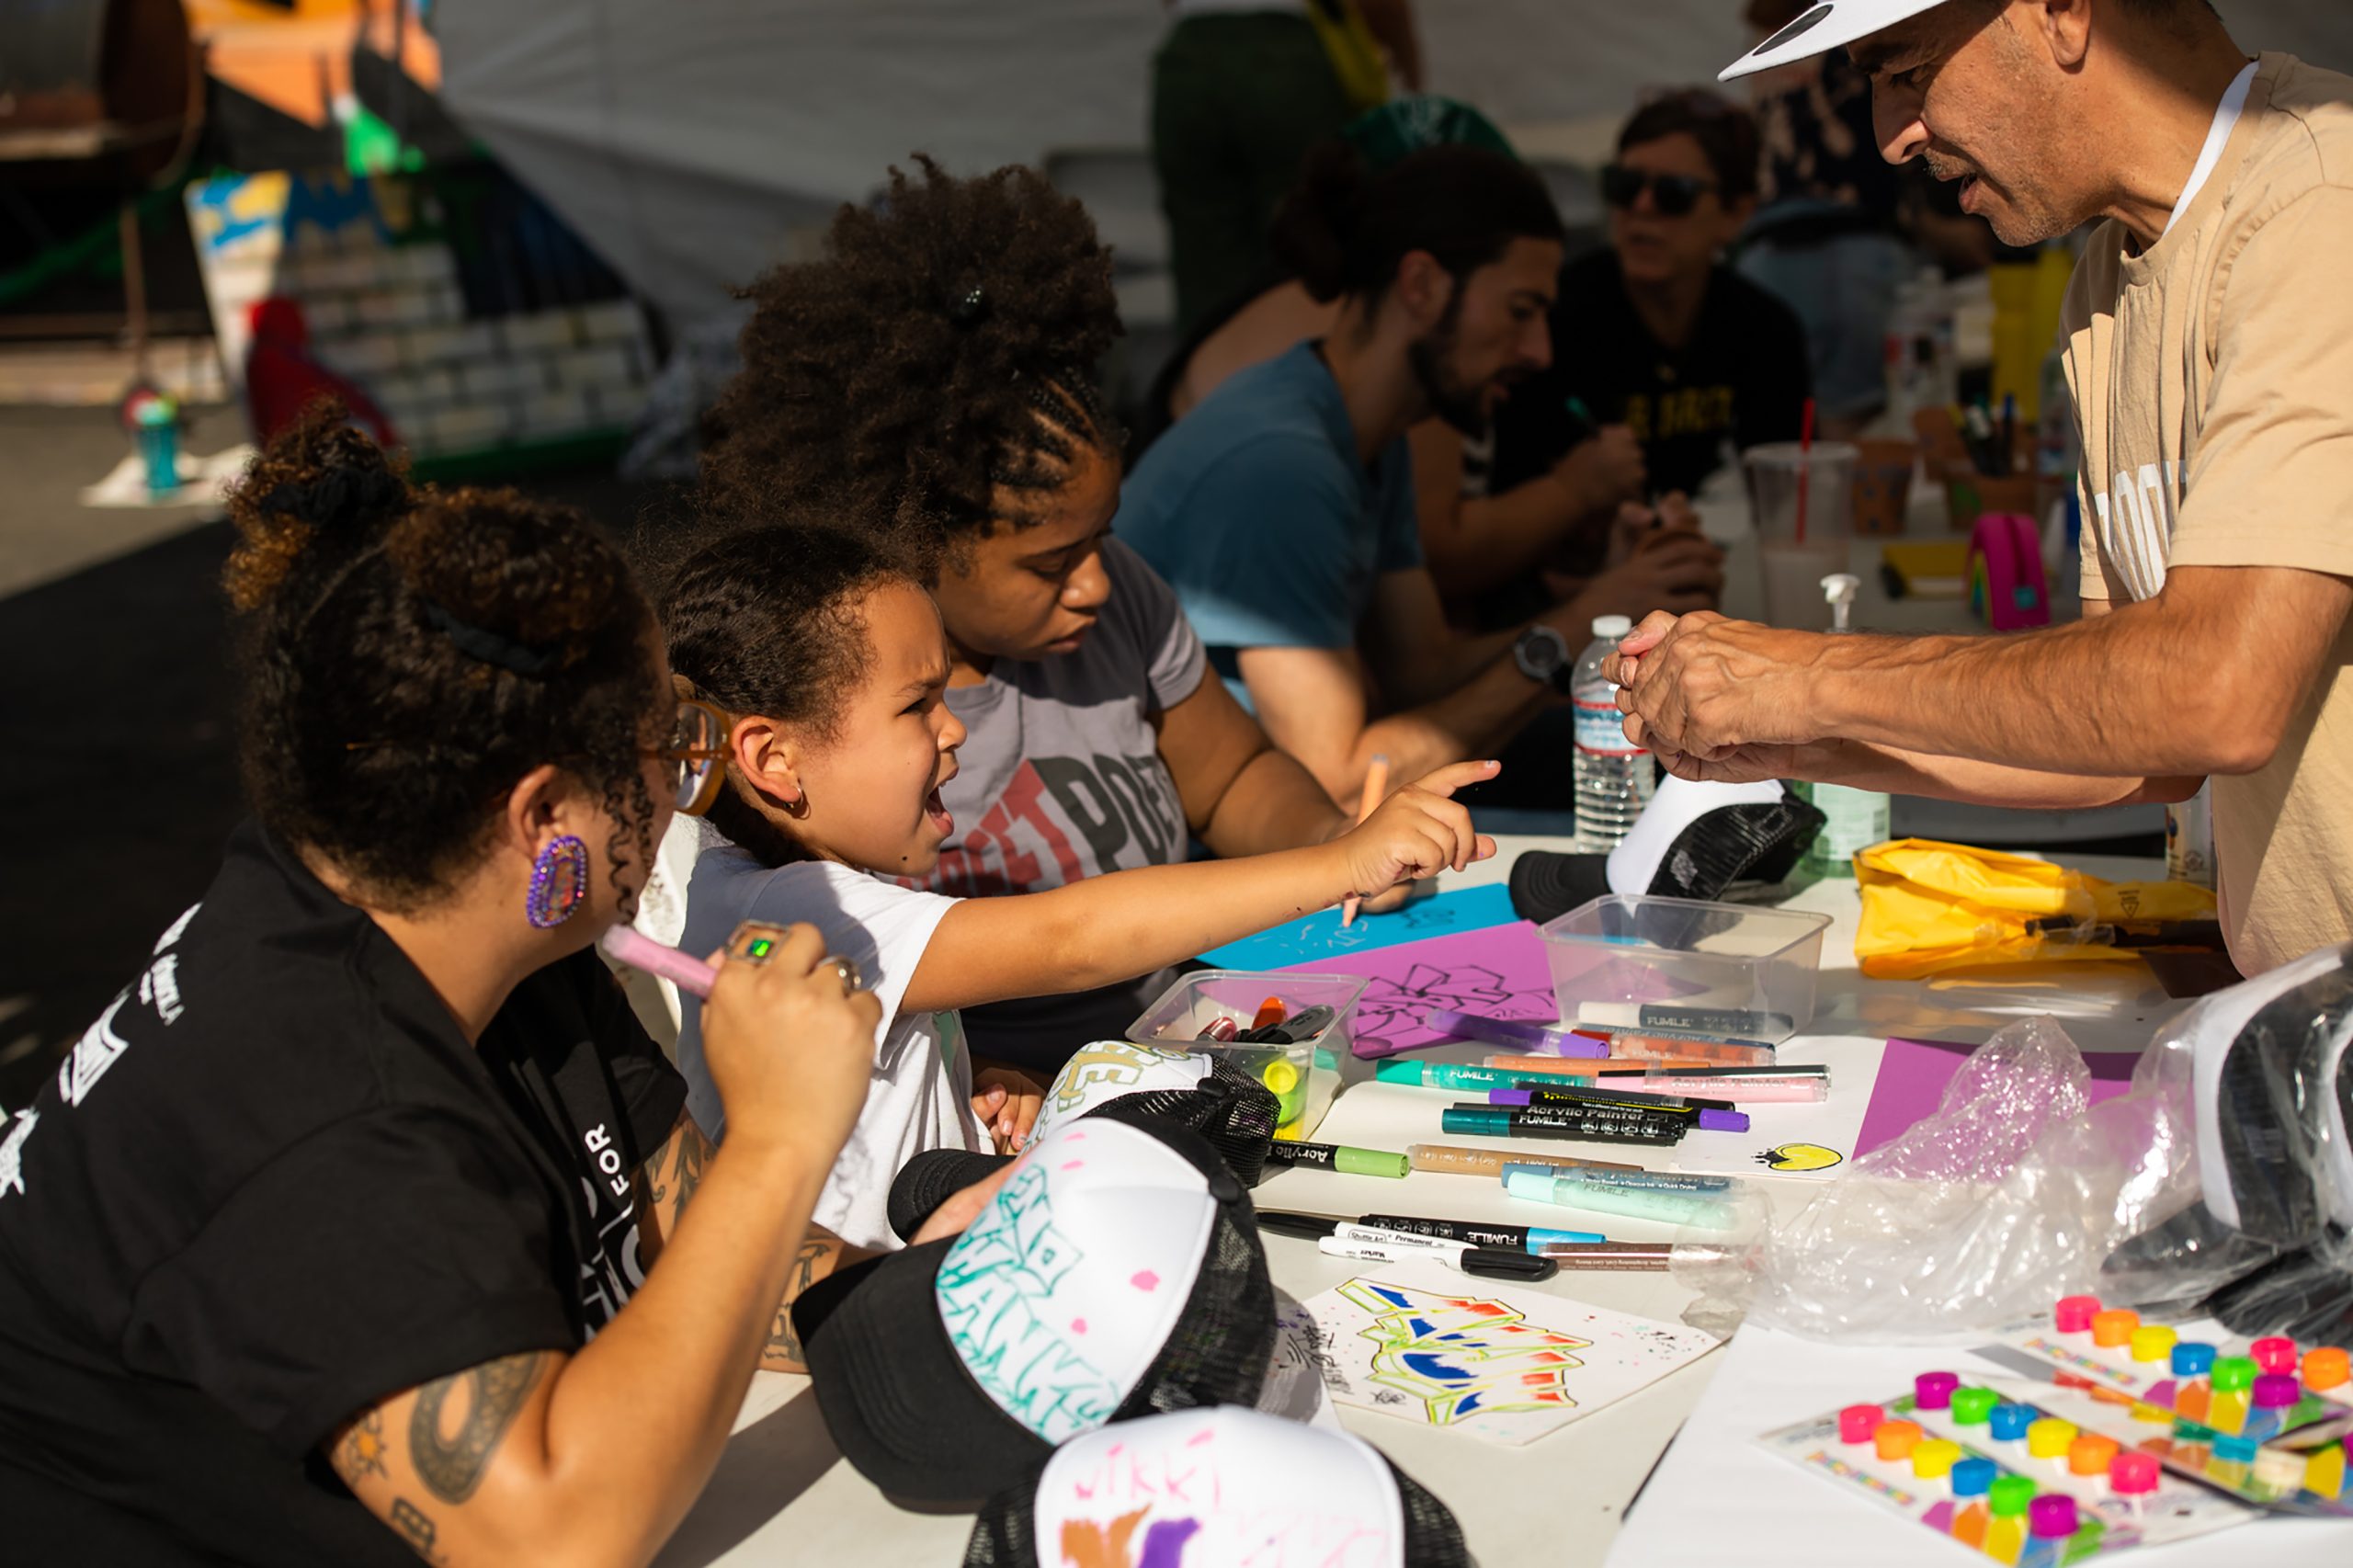 A photograph of members of the Arts for Healing and Justice Network and LA Youth Uprising Coalition community make art at a table covered with art supplies.